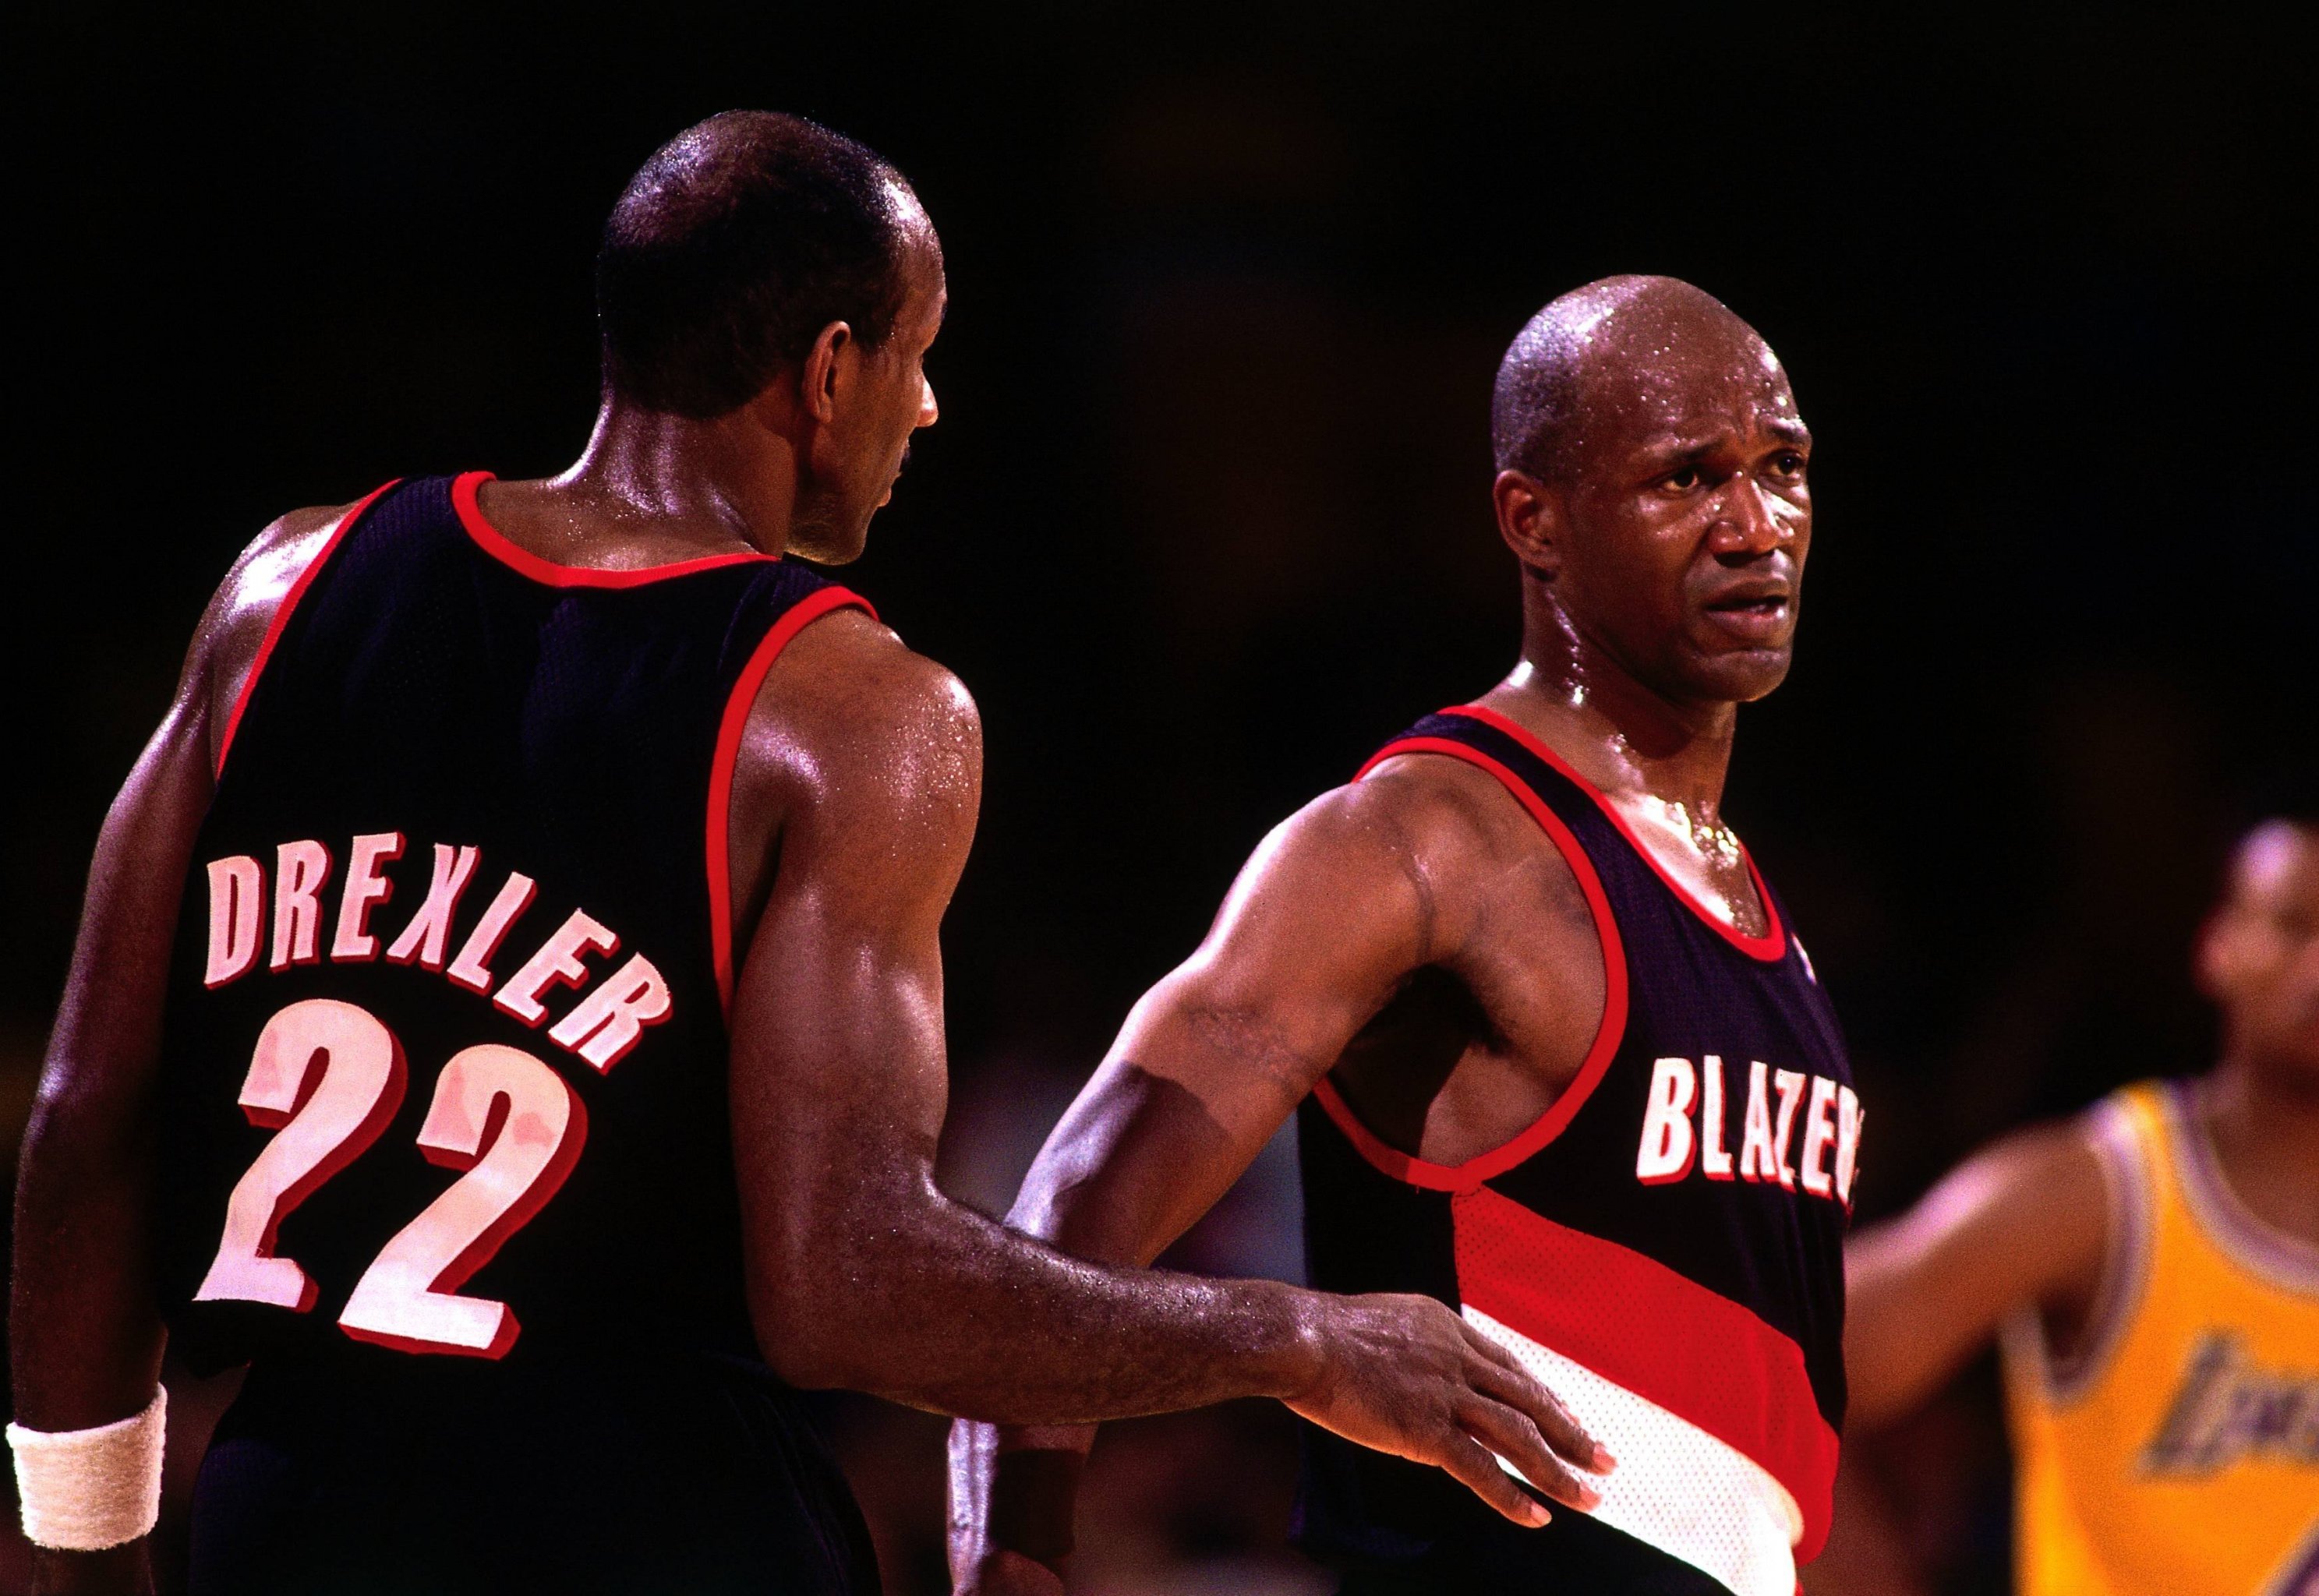 ALL-TIME BLAZERS VS FIELD OF ALL-TIME GREATS FROM HISTORIC TEAMS